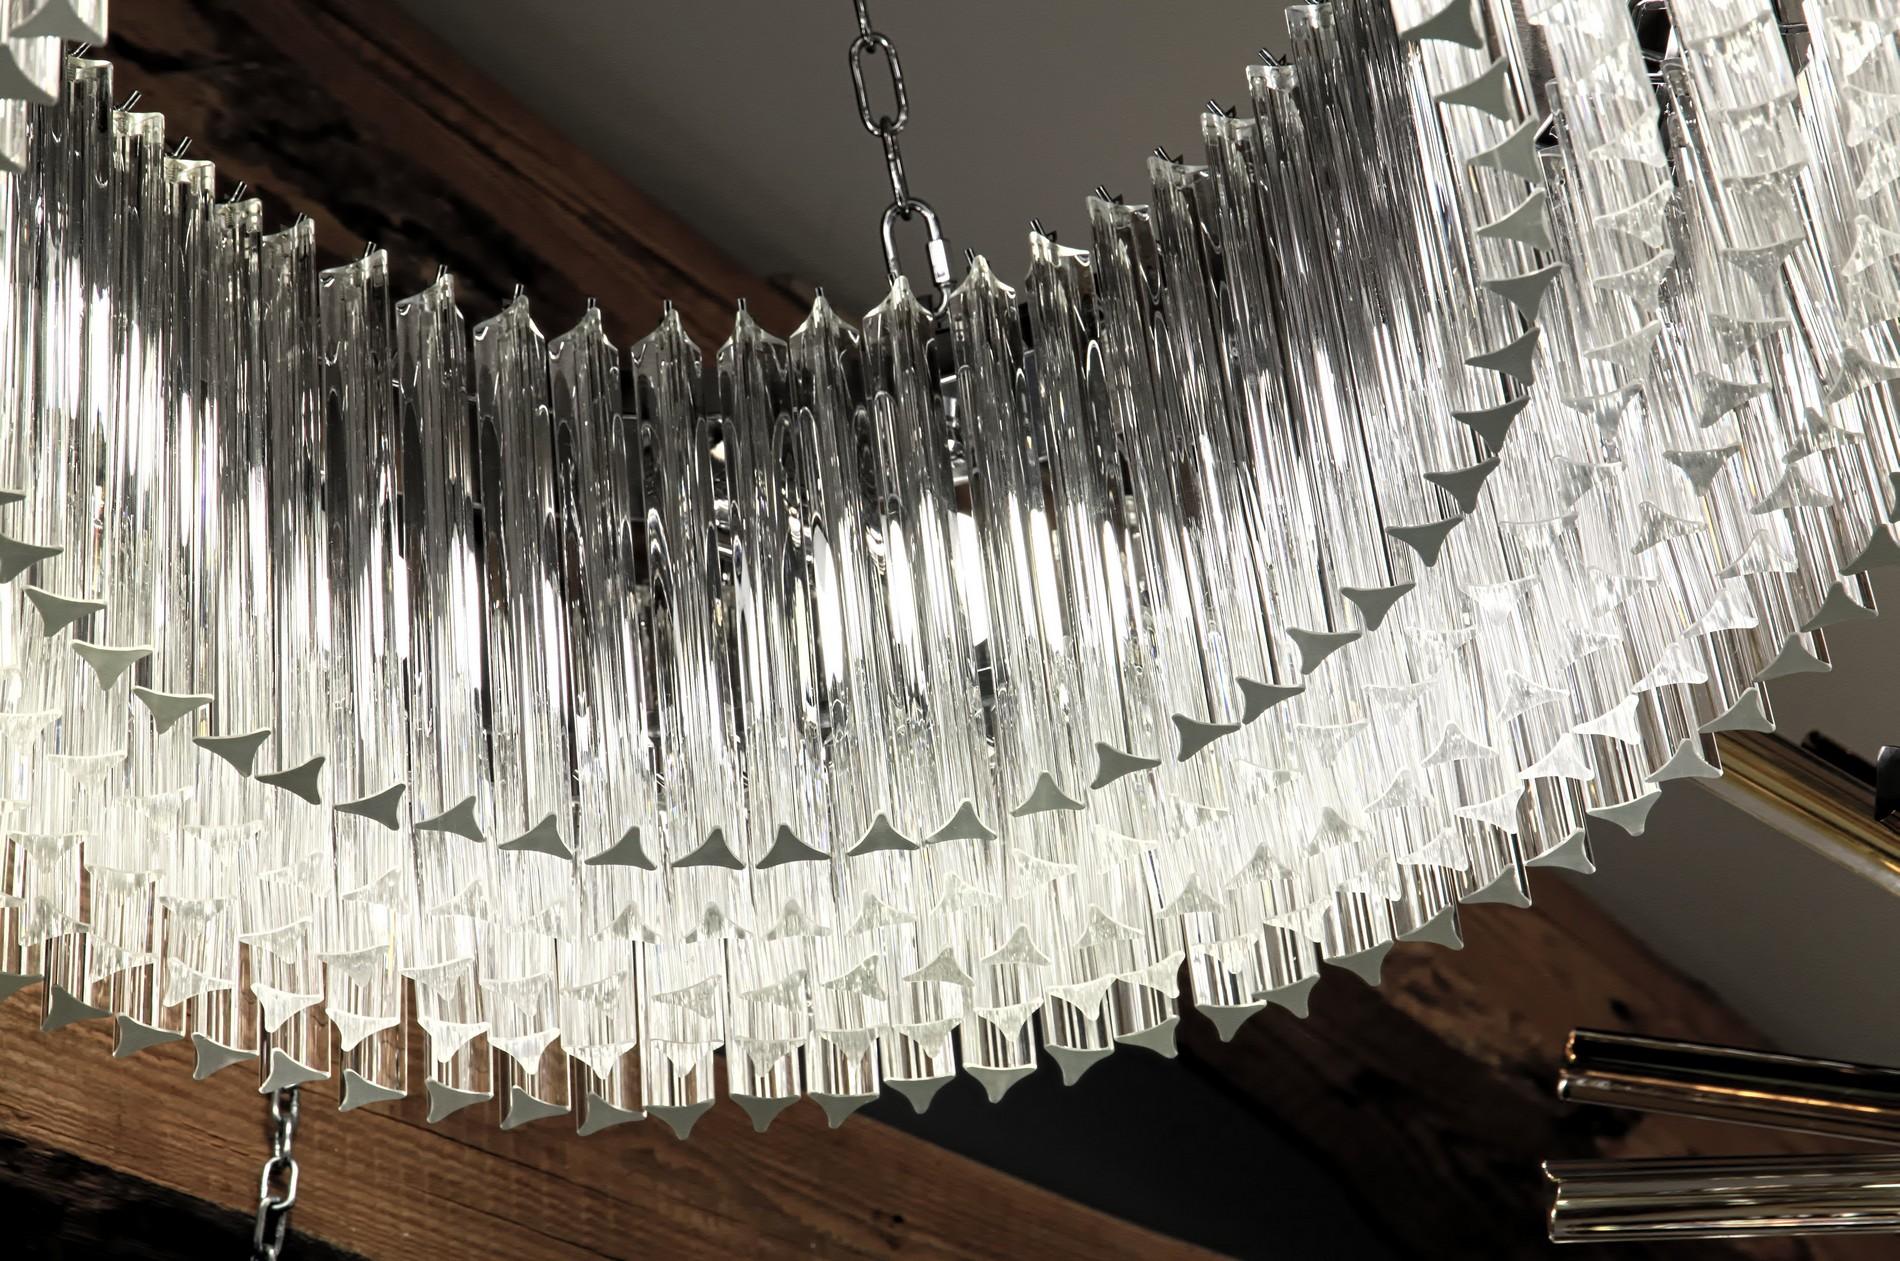 A modern version of a Classic chandelier using a ring of 5 layers of Triedri. Creates a great architectural effect and use of space.
There are more than 350 elements of two lengths. The two fencing layers are 30 cm tall and the middle ones are